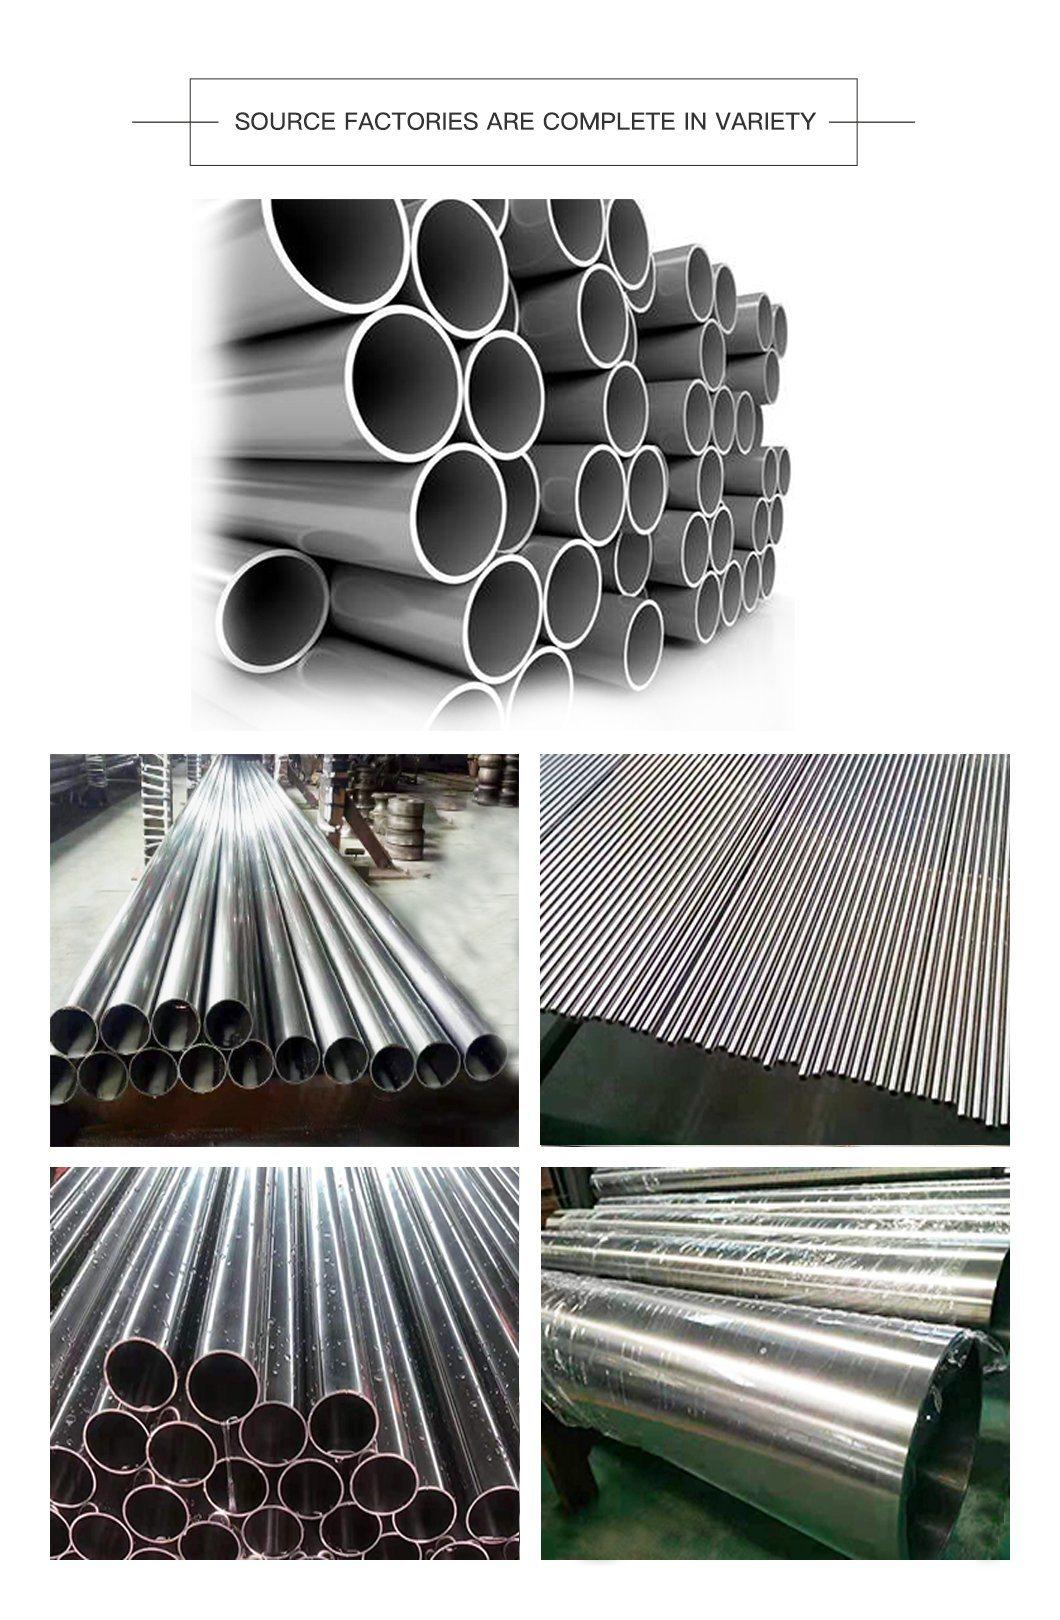 High Quality Decorative Stainless Round Seamless Stainless Steel Pipe